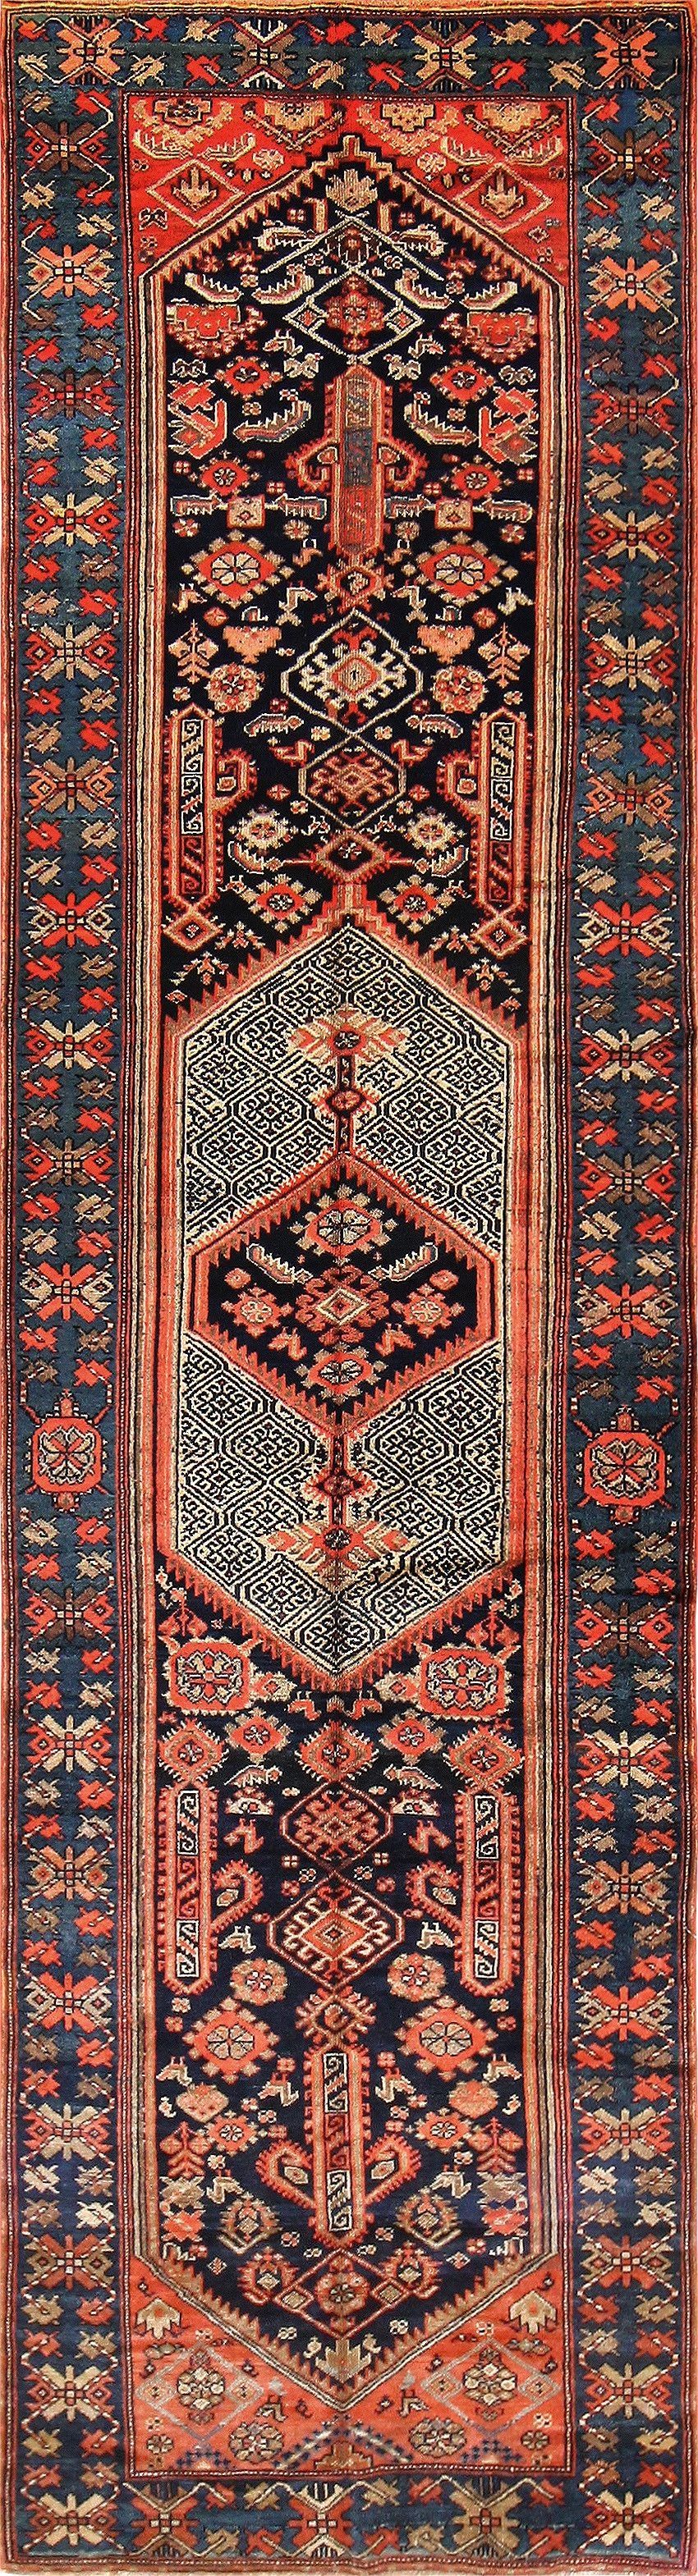 Runner Rugs Carpet Runners Antique Hall Runners Oriental Runner With Regard To Runner Rugs For Long Hallway (View 20 of 20)